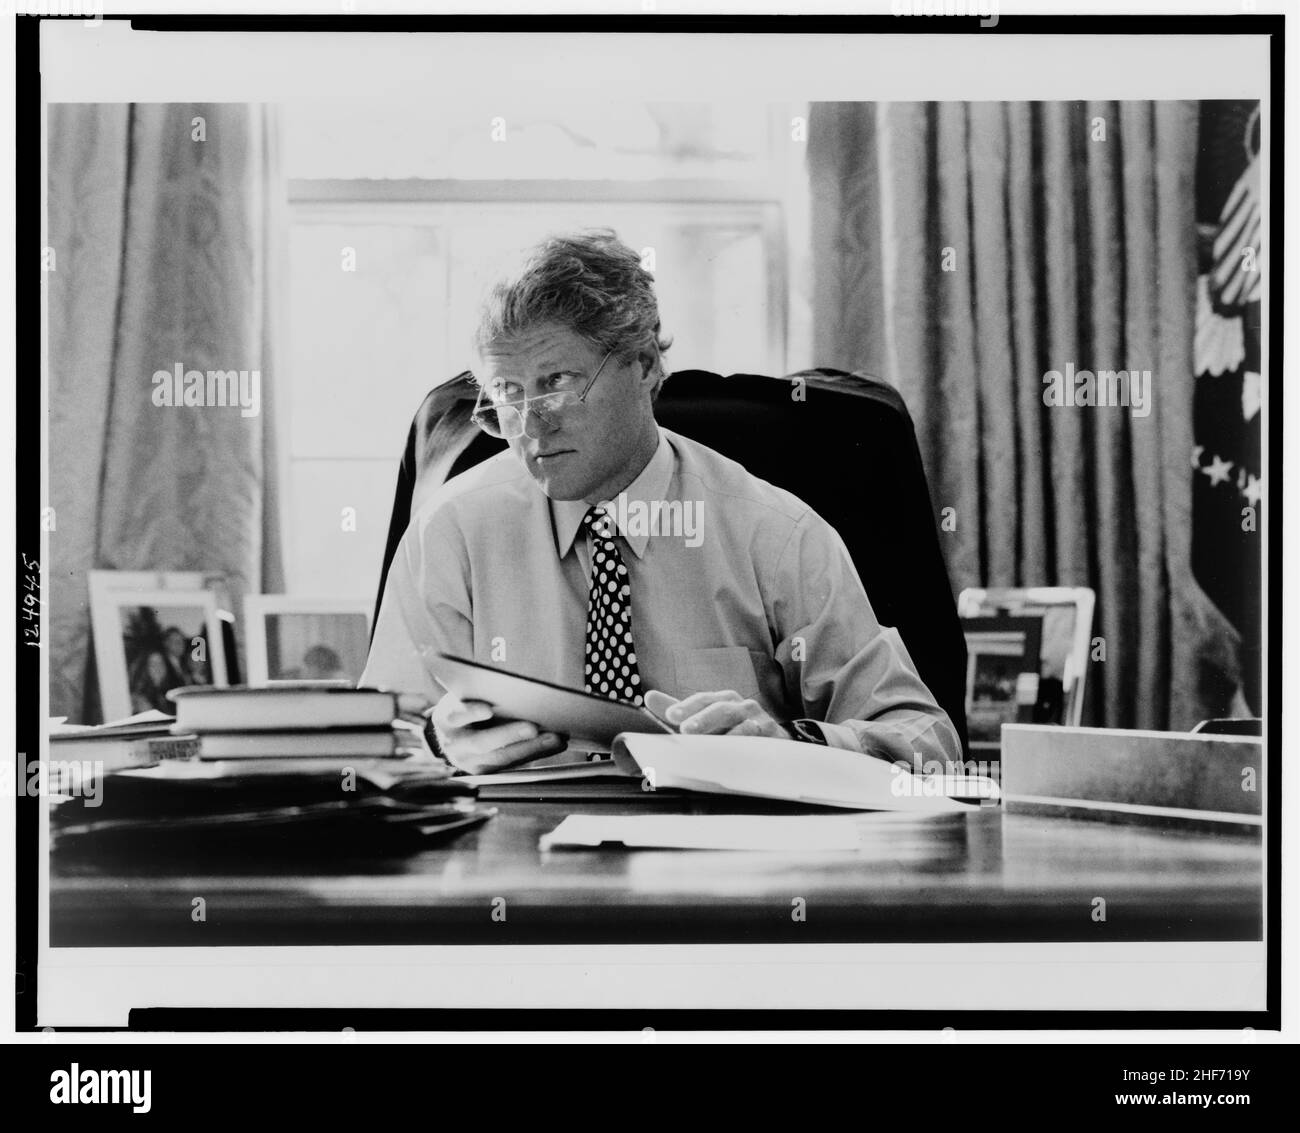 President William J Clinton, seated at his desk in the Oval Office, Washington, DC, 1993. Stock Photo